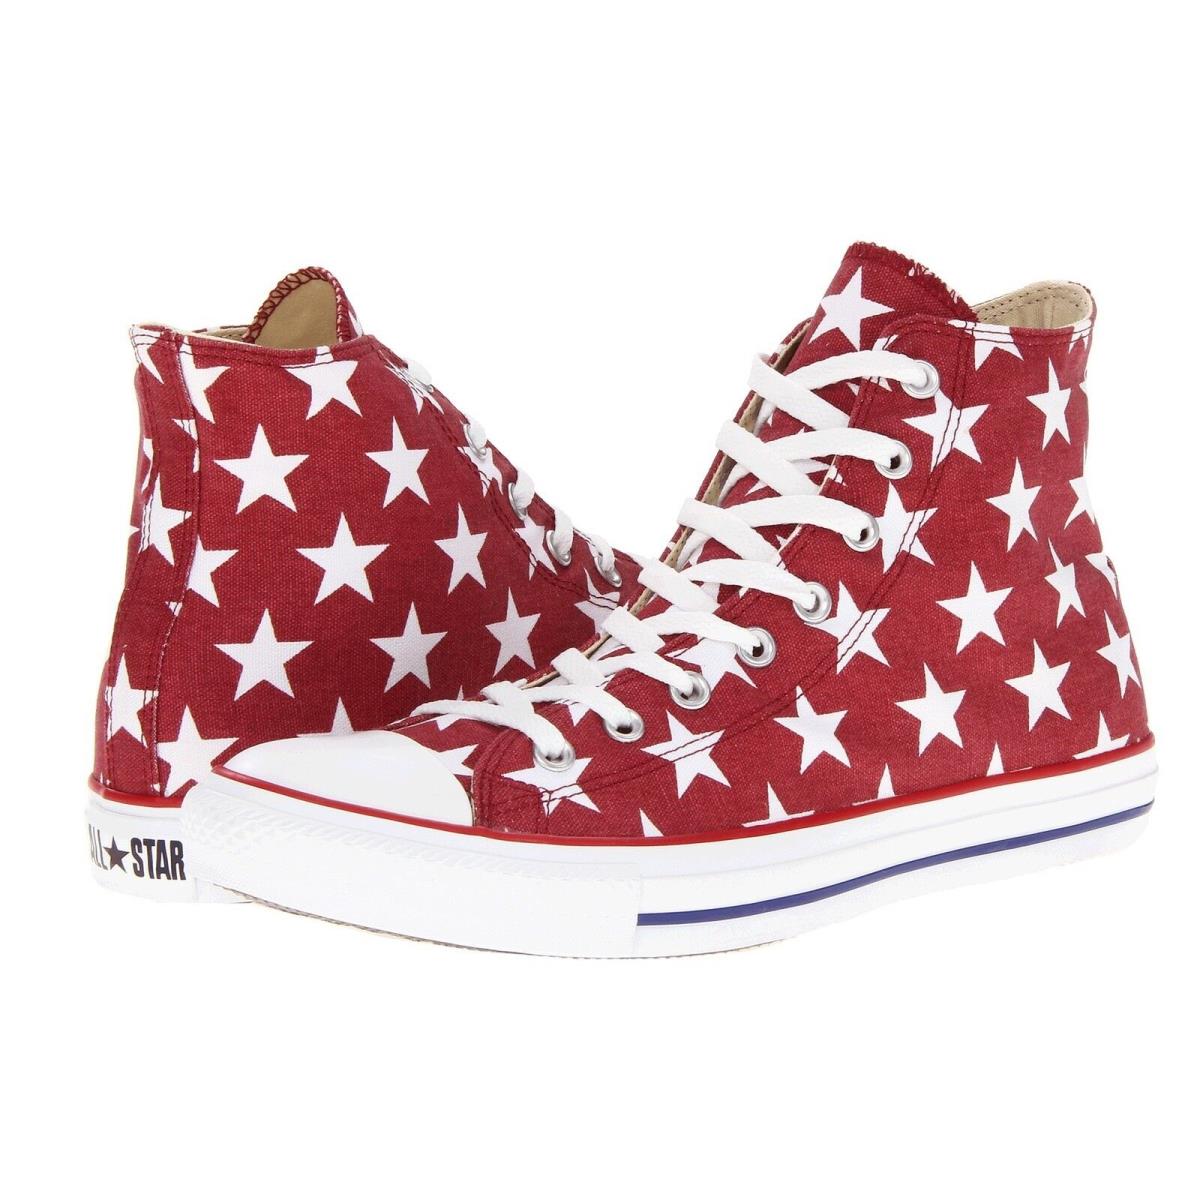 Converse Chuck Taylor All Star Print Hi Top Jester Red White Shoe 8 9 10 11 12